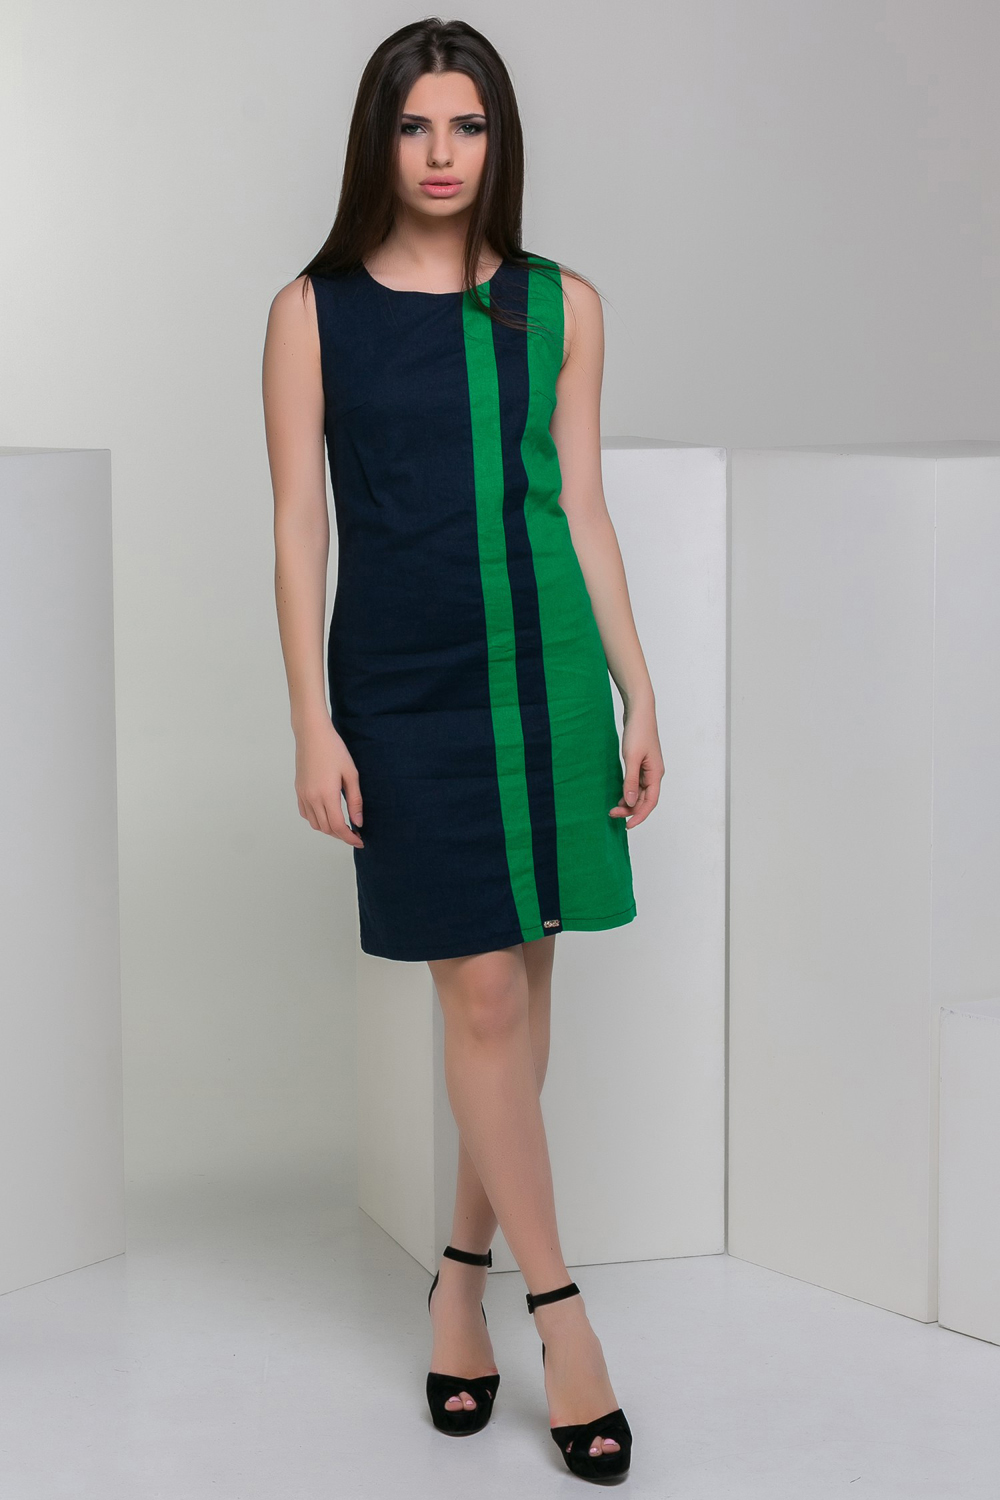 Linen dress with green inset